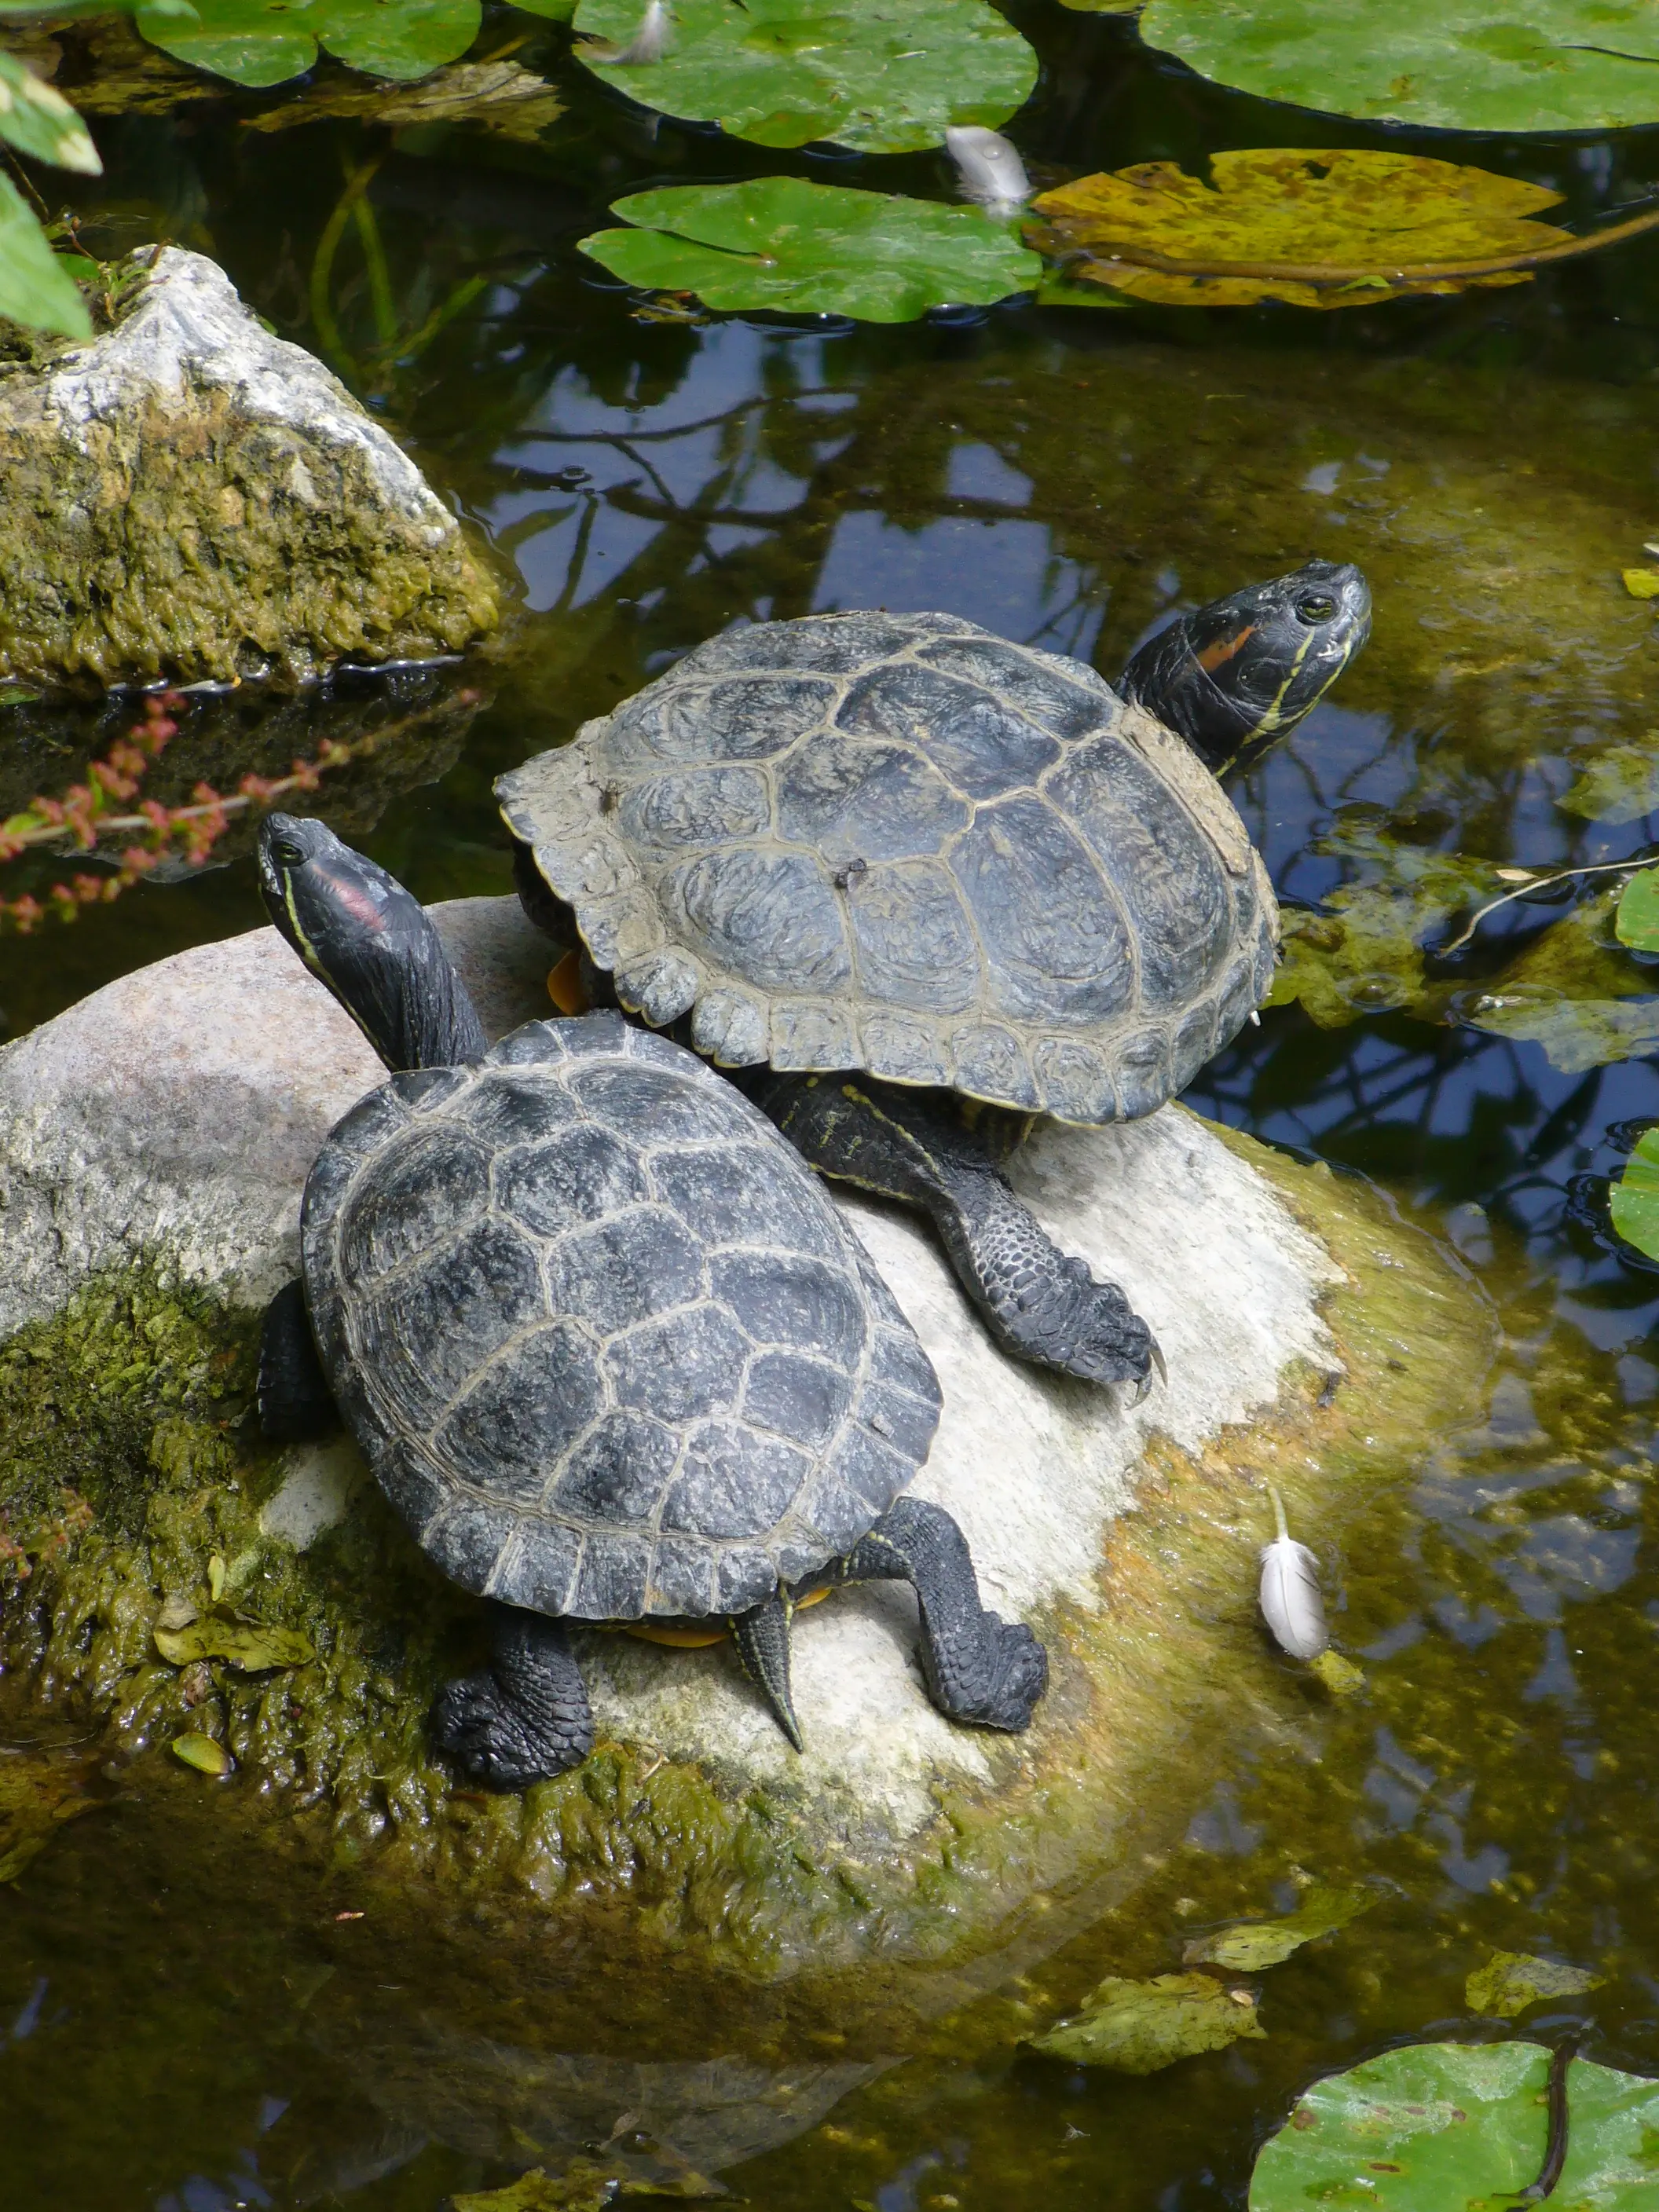 The American red-eared slider (Trachemys scripta elegans) is a freshwater turtle usually sold as a pet, and now introduced in several European countries where it represents an ecological threat for the indigenous fauna and flora.